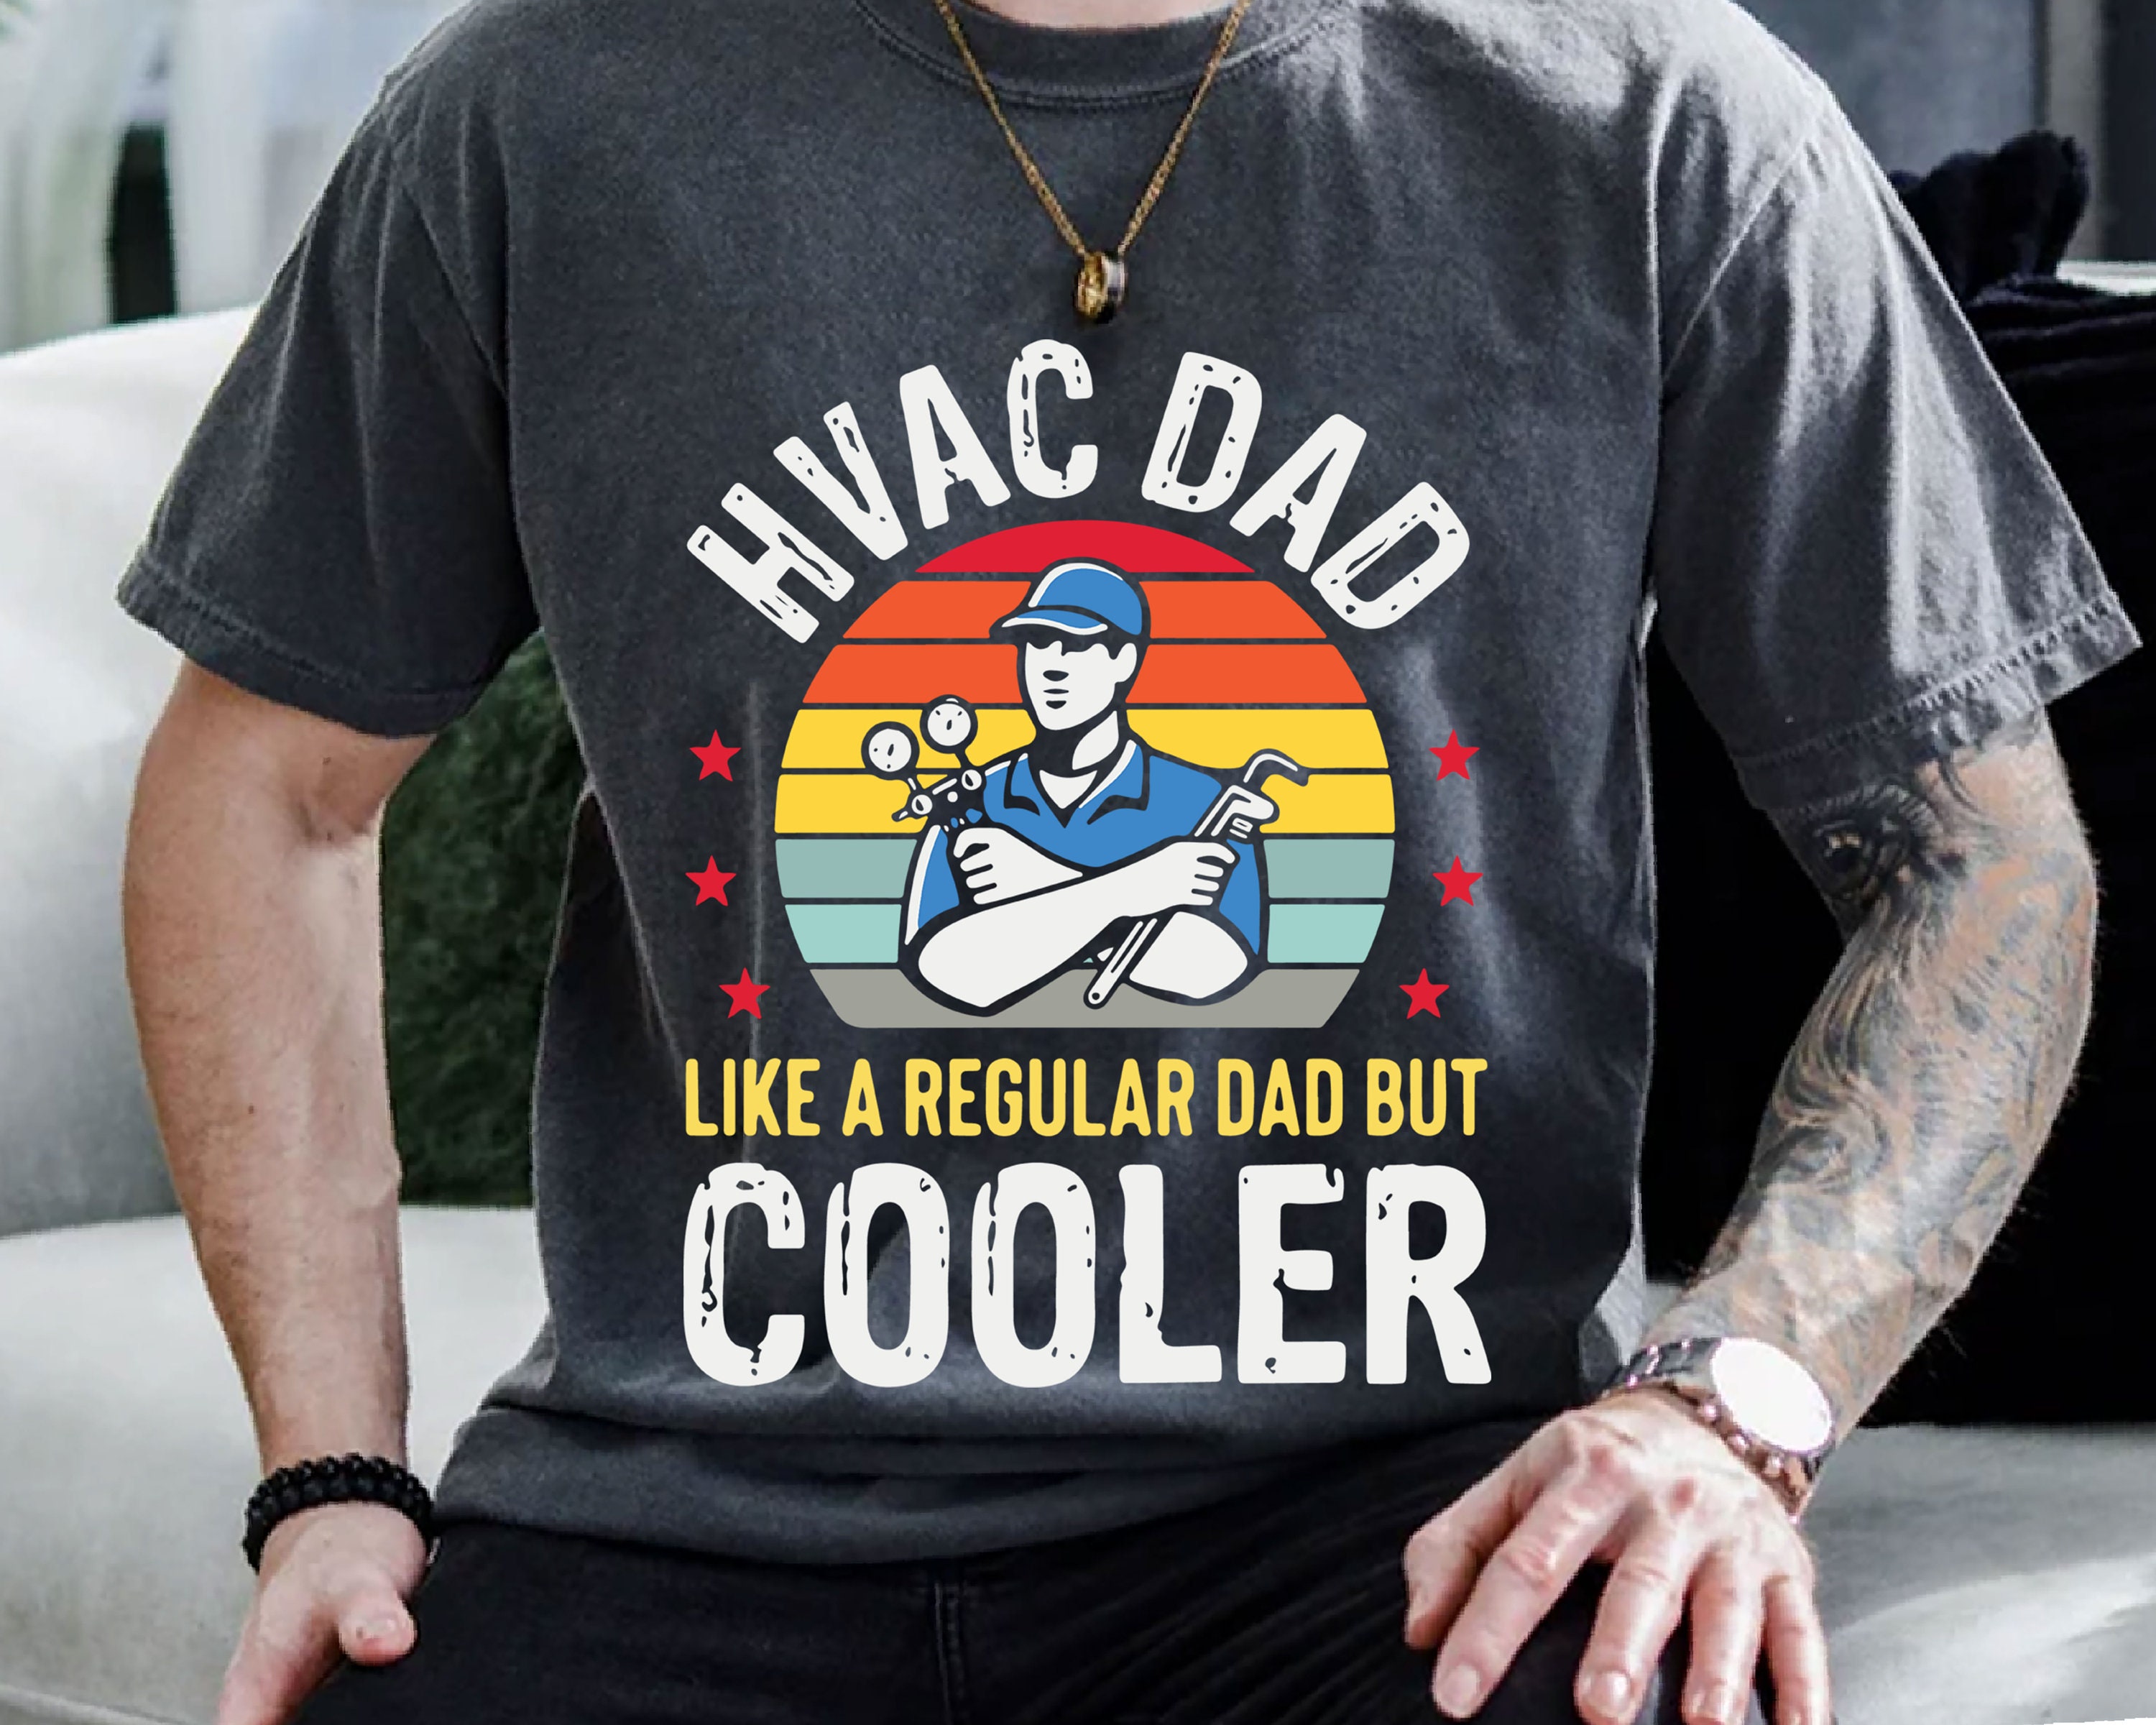 Reel Cool Dad Bass Can Cooler Png, Dad Sublimation Design